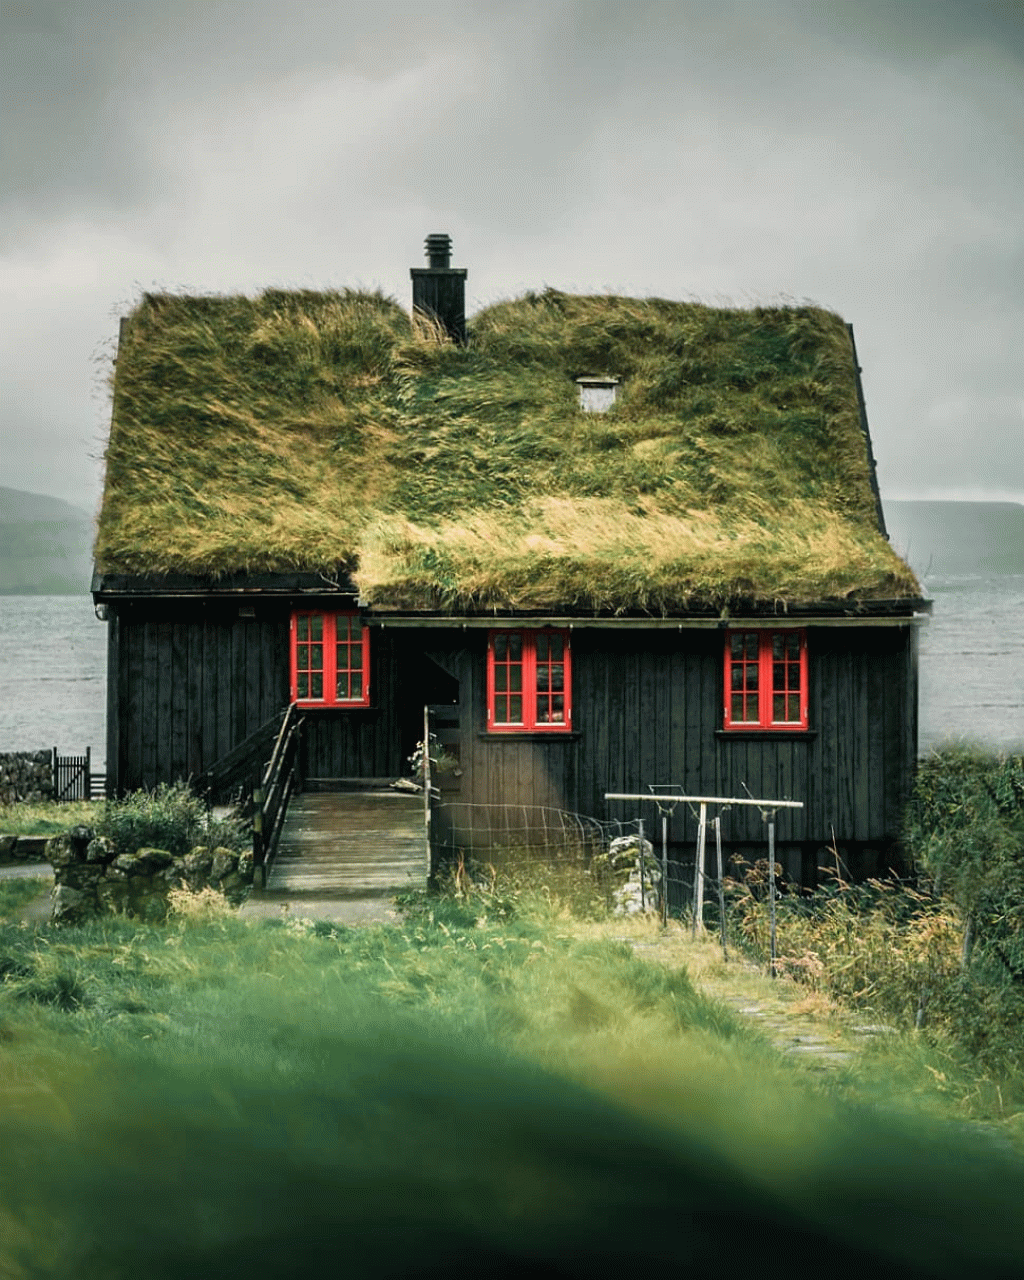 The Faroe Islands are like heaven! Every couple of kilometers you will see some houses with grass roofs, or other amazing cabins.